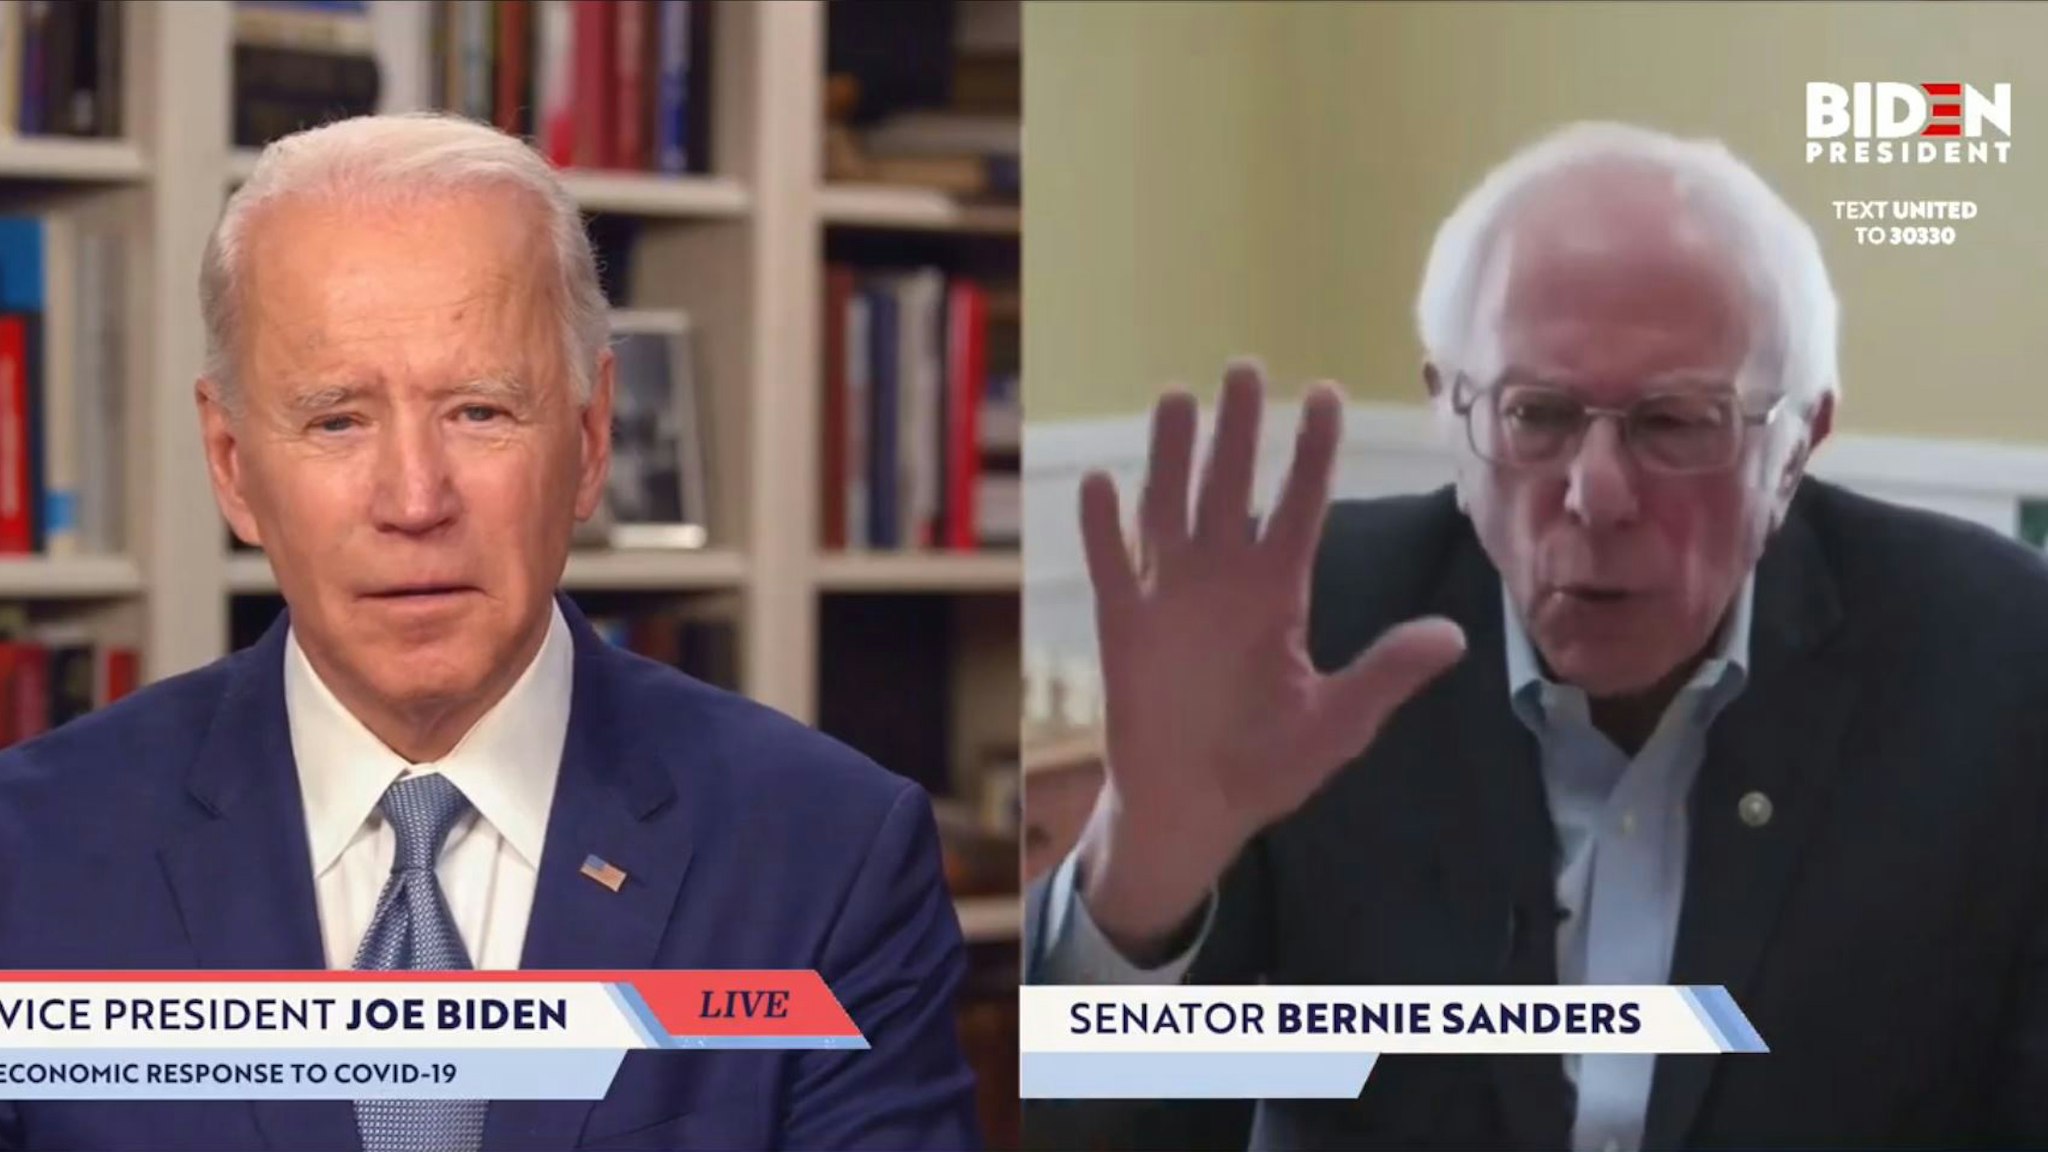 UNKNOWN LOCATION - APRIL 13: In this screengrab taken from JoeBiden.com campaign website, U.S. Sen. Bernie Sanders (I-VT) endorses Democratic presidential candidate former Vice President Joe Biden during a live streaming broadcast on April 13, 2020. Sanders said, “Today, I am asking all Americans—I’m asking every Democrat, I’m asking every Independent, I’m asking a lot of Republicans—to come together in this campaign to support your candidacy.”